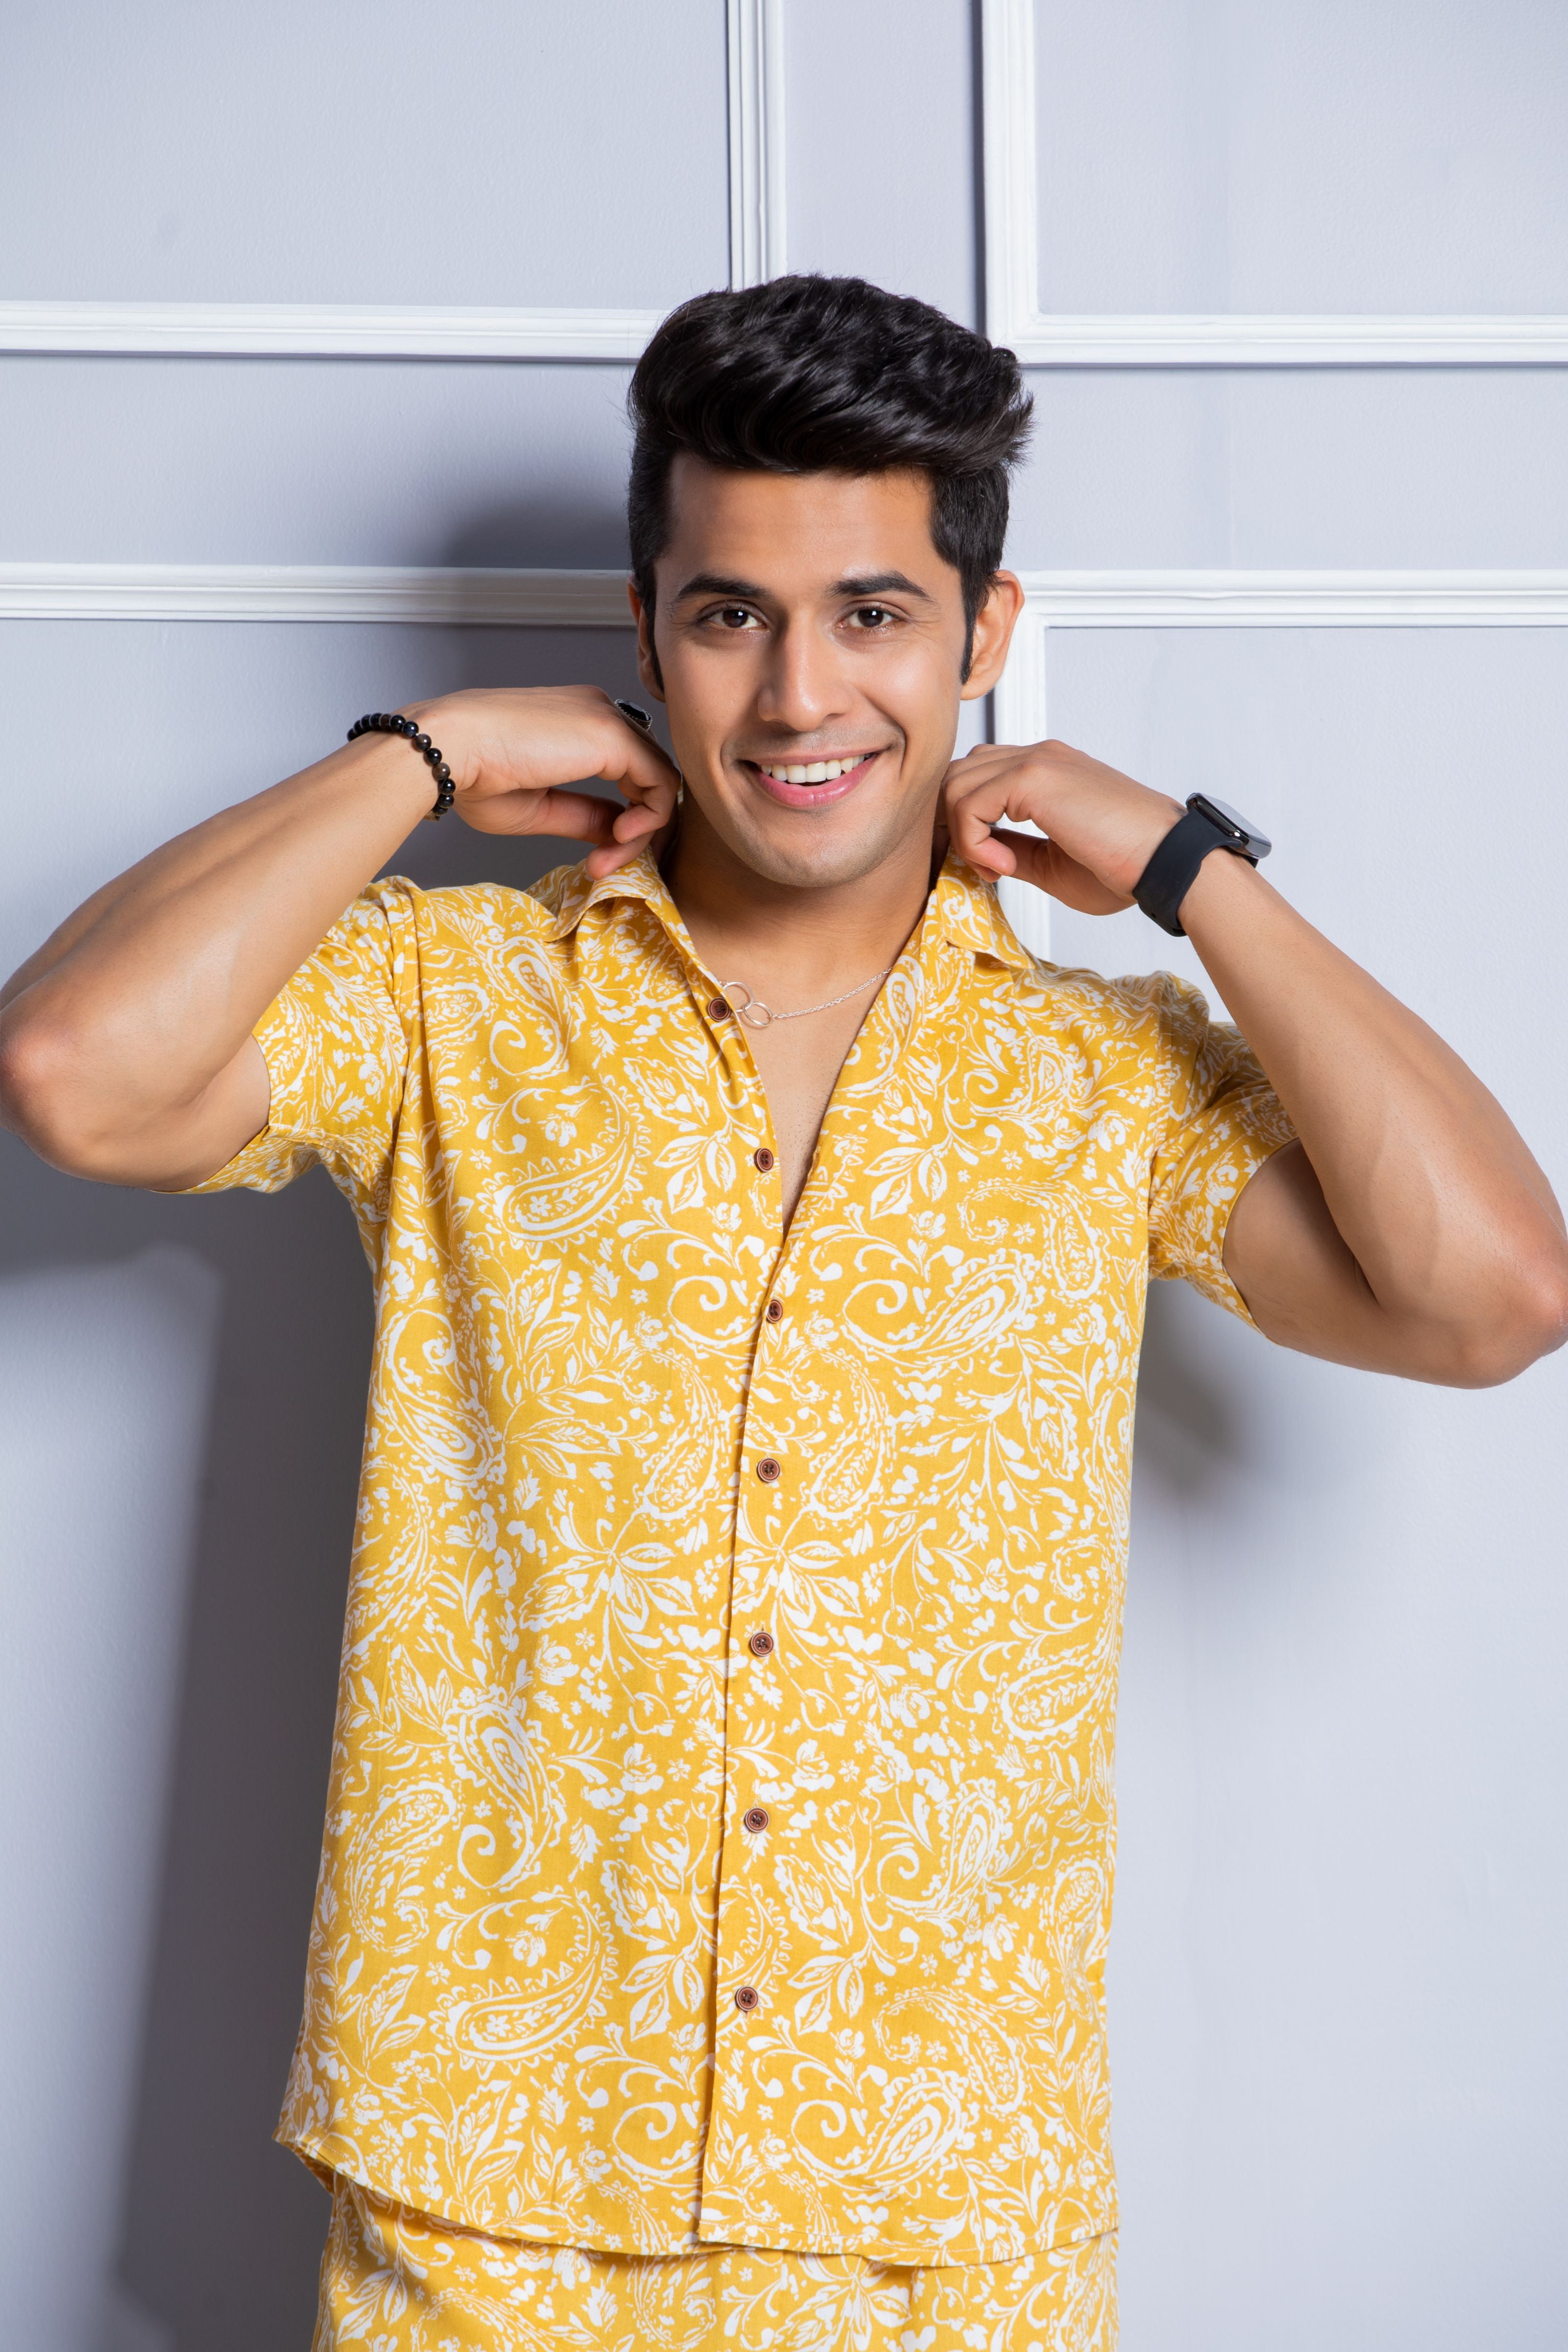 Firangi Yarn Printed Cuban Collar Yellow Floral Summer Lounge and Beach Co-ord Set For Men